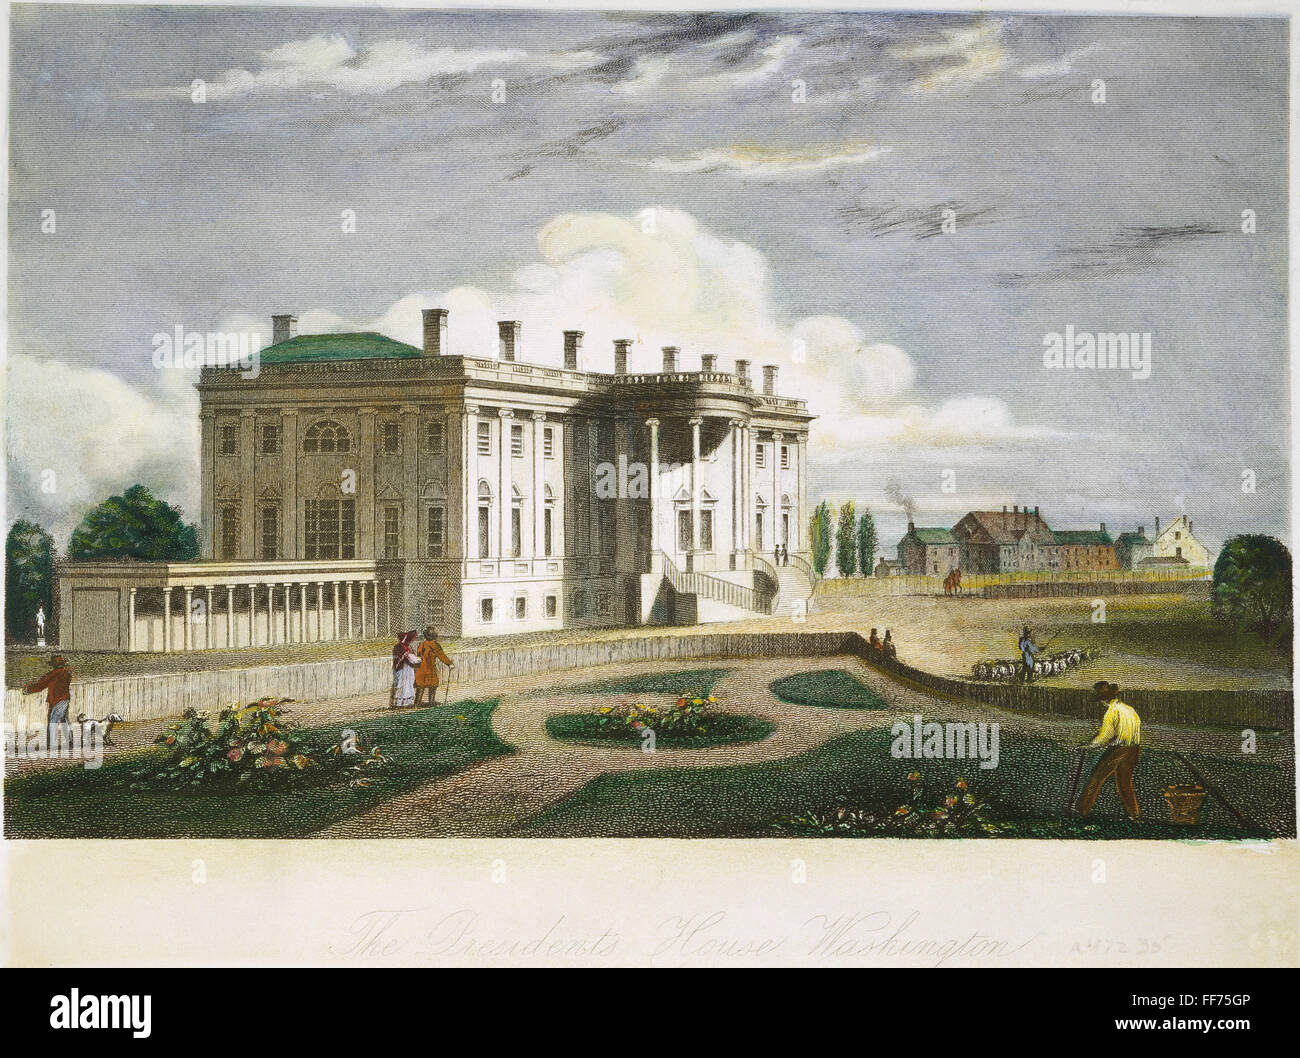 WHITE HOUSE, D.C., 1830. /nThe President's House at Washington, D.C. Steel engraving, American, 1830. Stock Photo